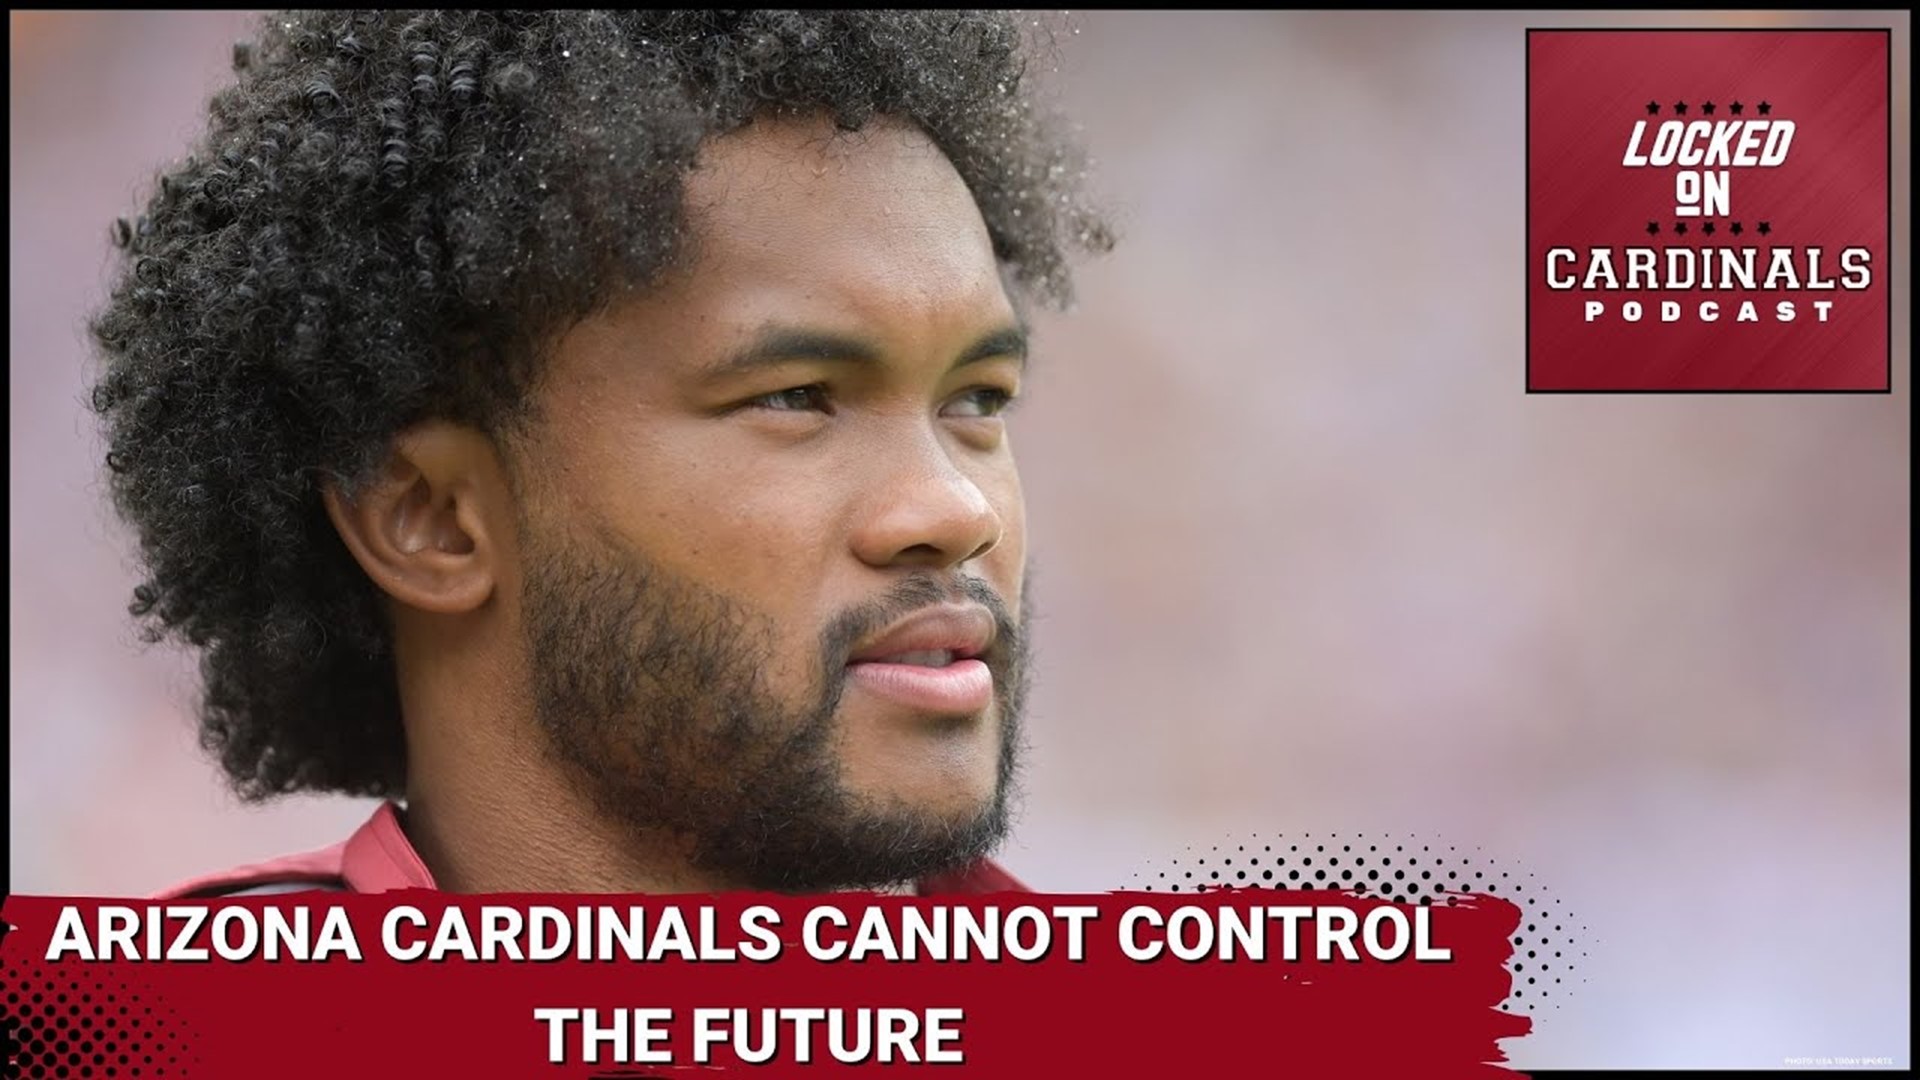 The Arizona Cardinals cannot control the future, only what's in front of them today.